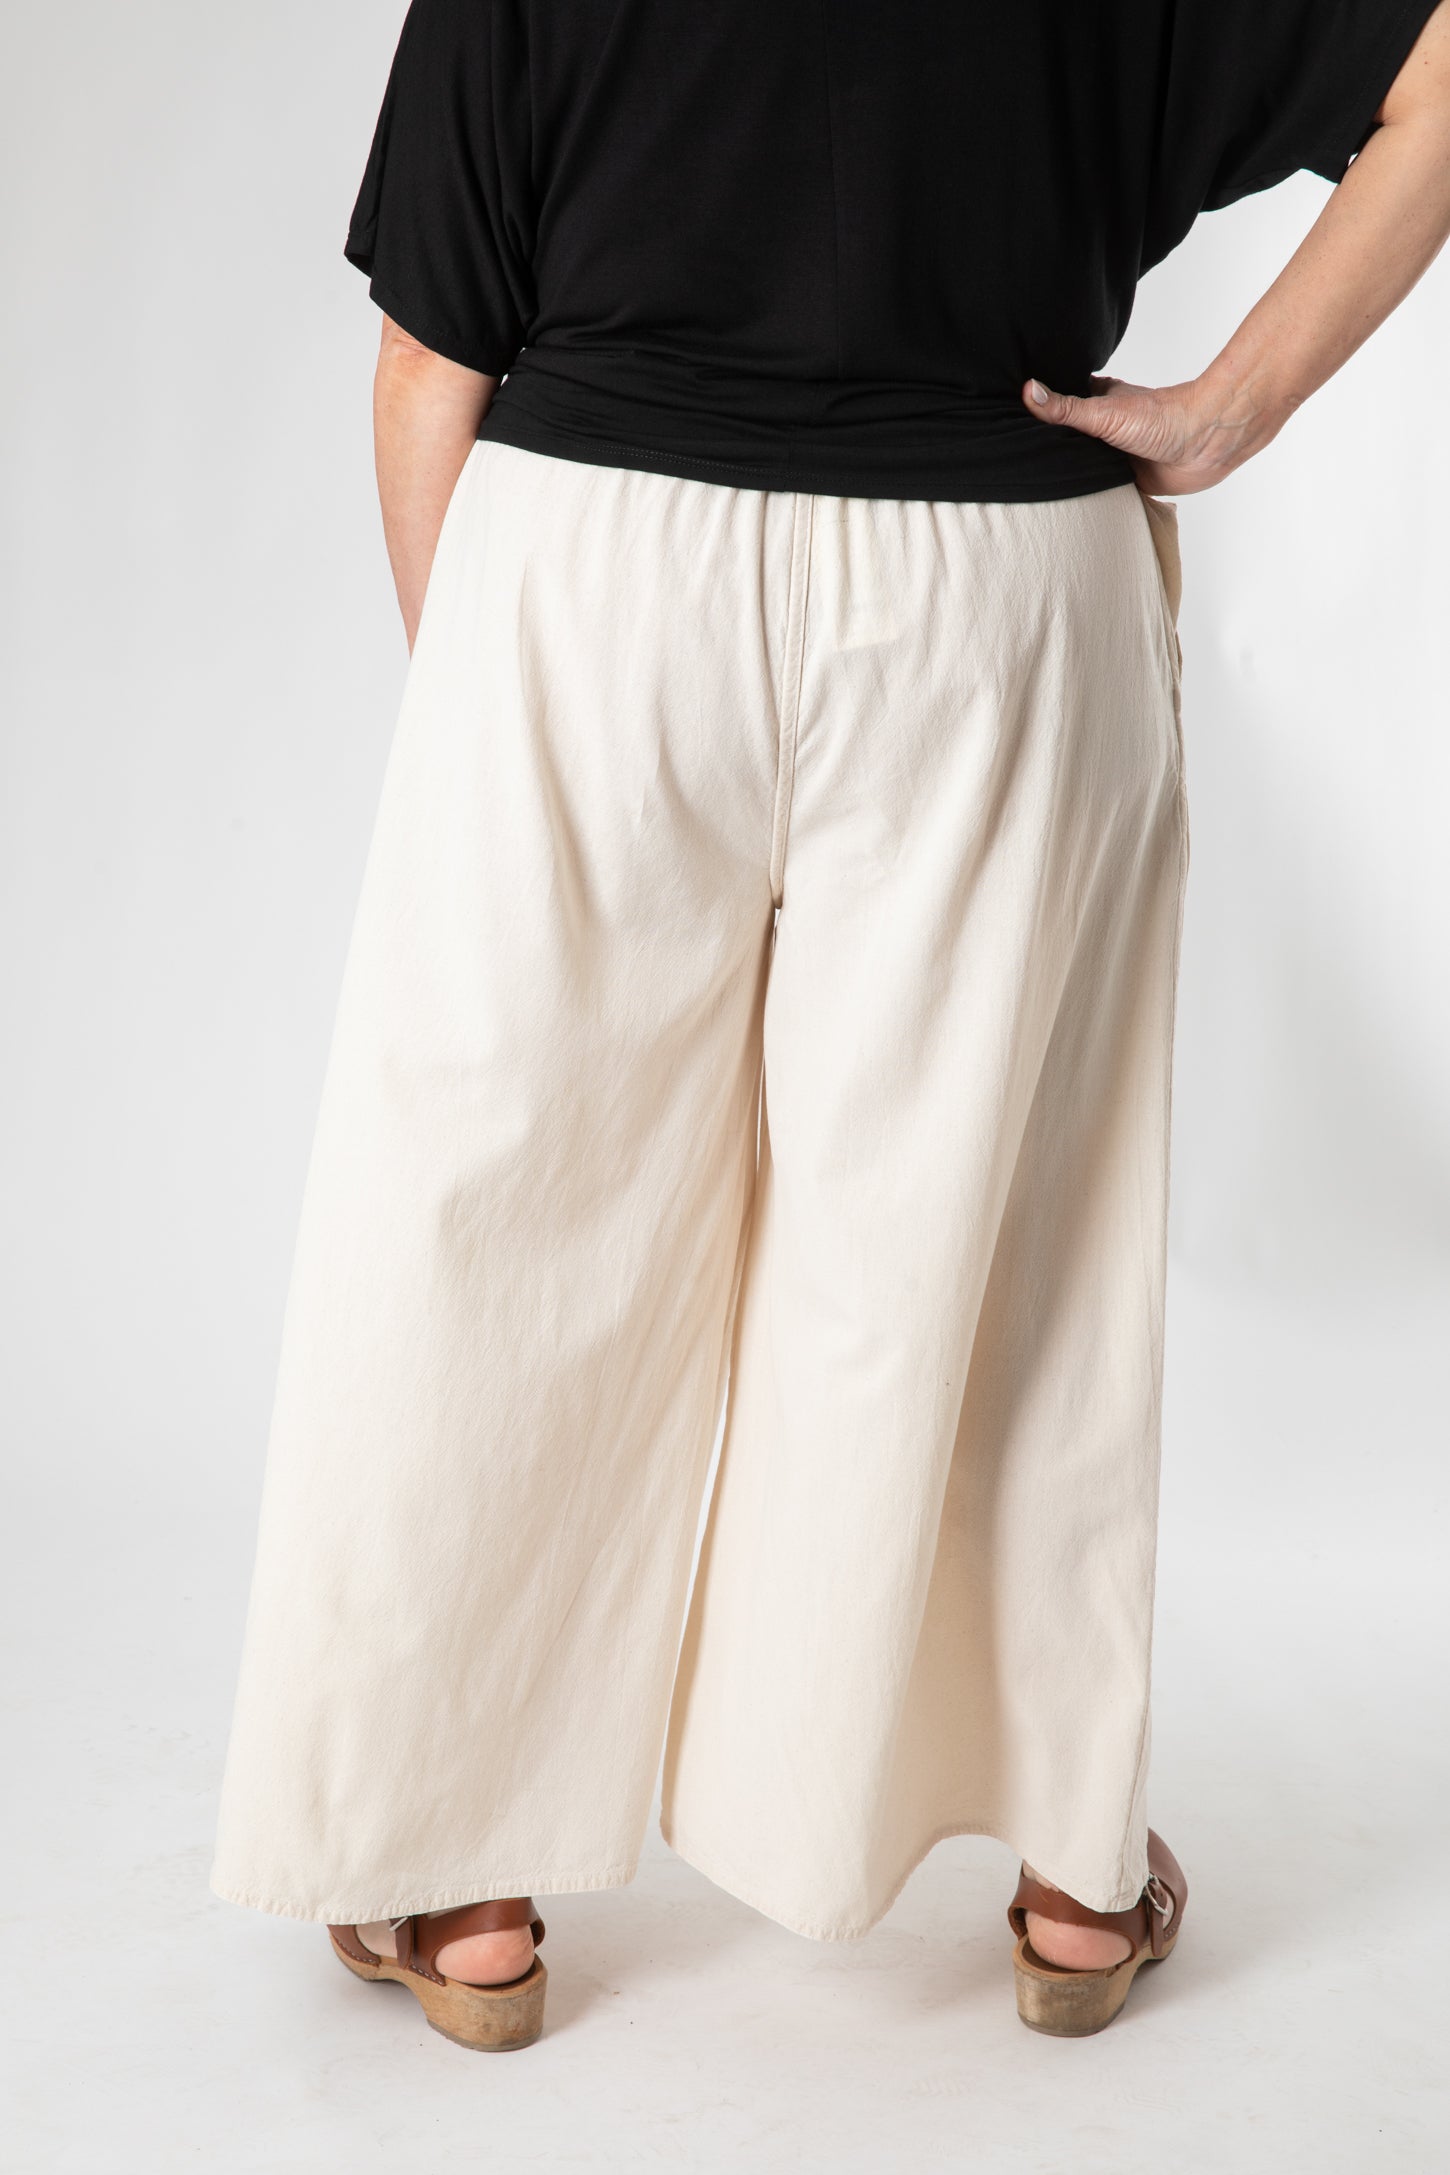 Buy Women's Rayon White Palazzo Pants with Dubal Lace (XS) at Amazon.in